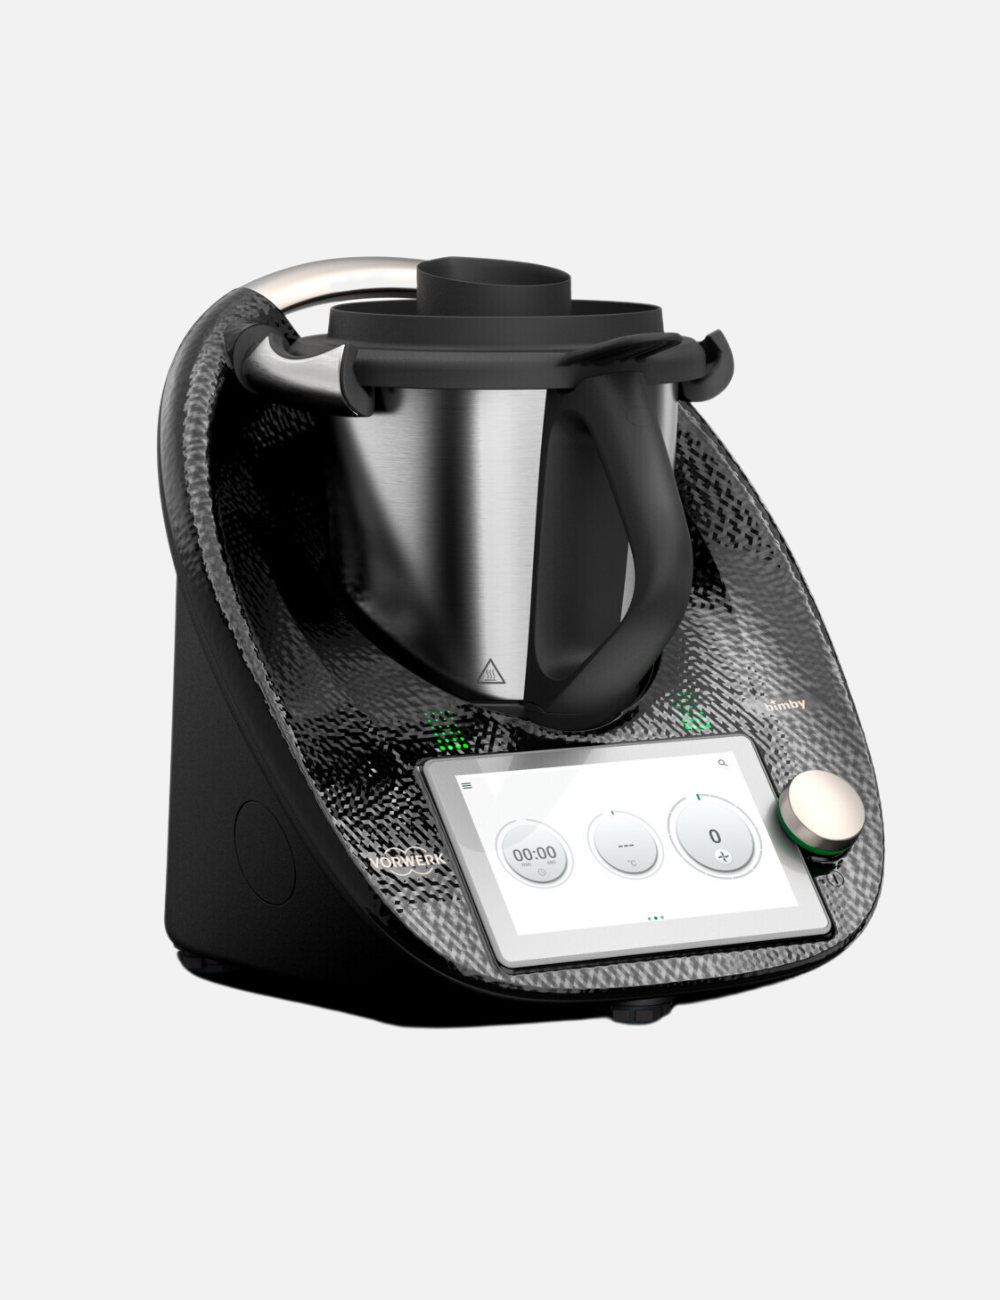 Thermomix TM6 Sparkling Black (Limited Edition) - Sylvest & Co